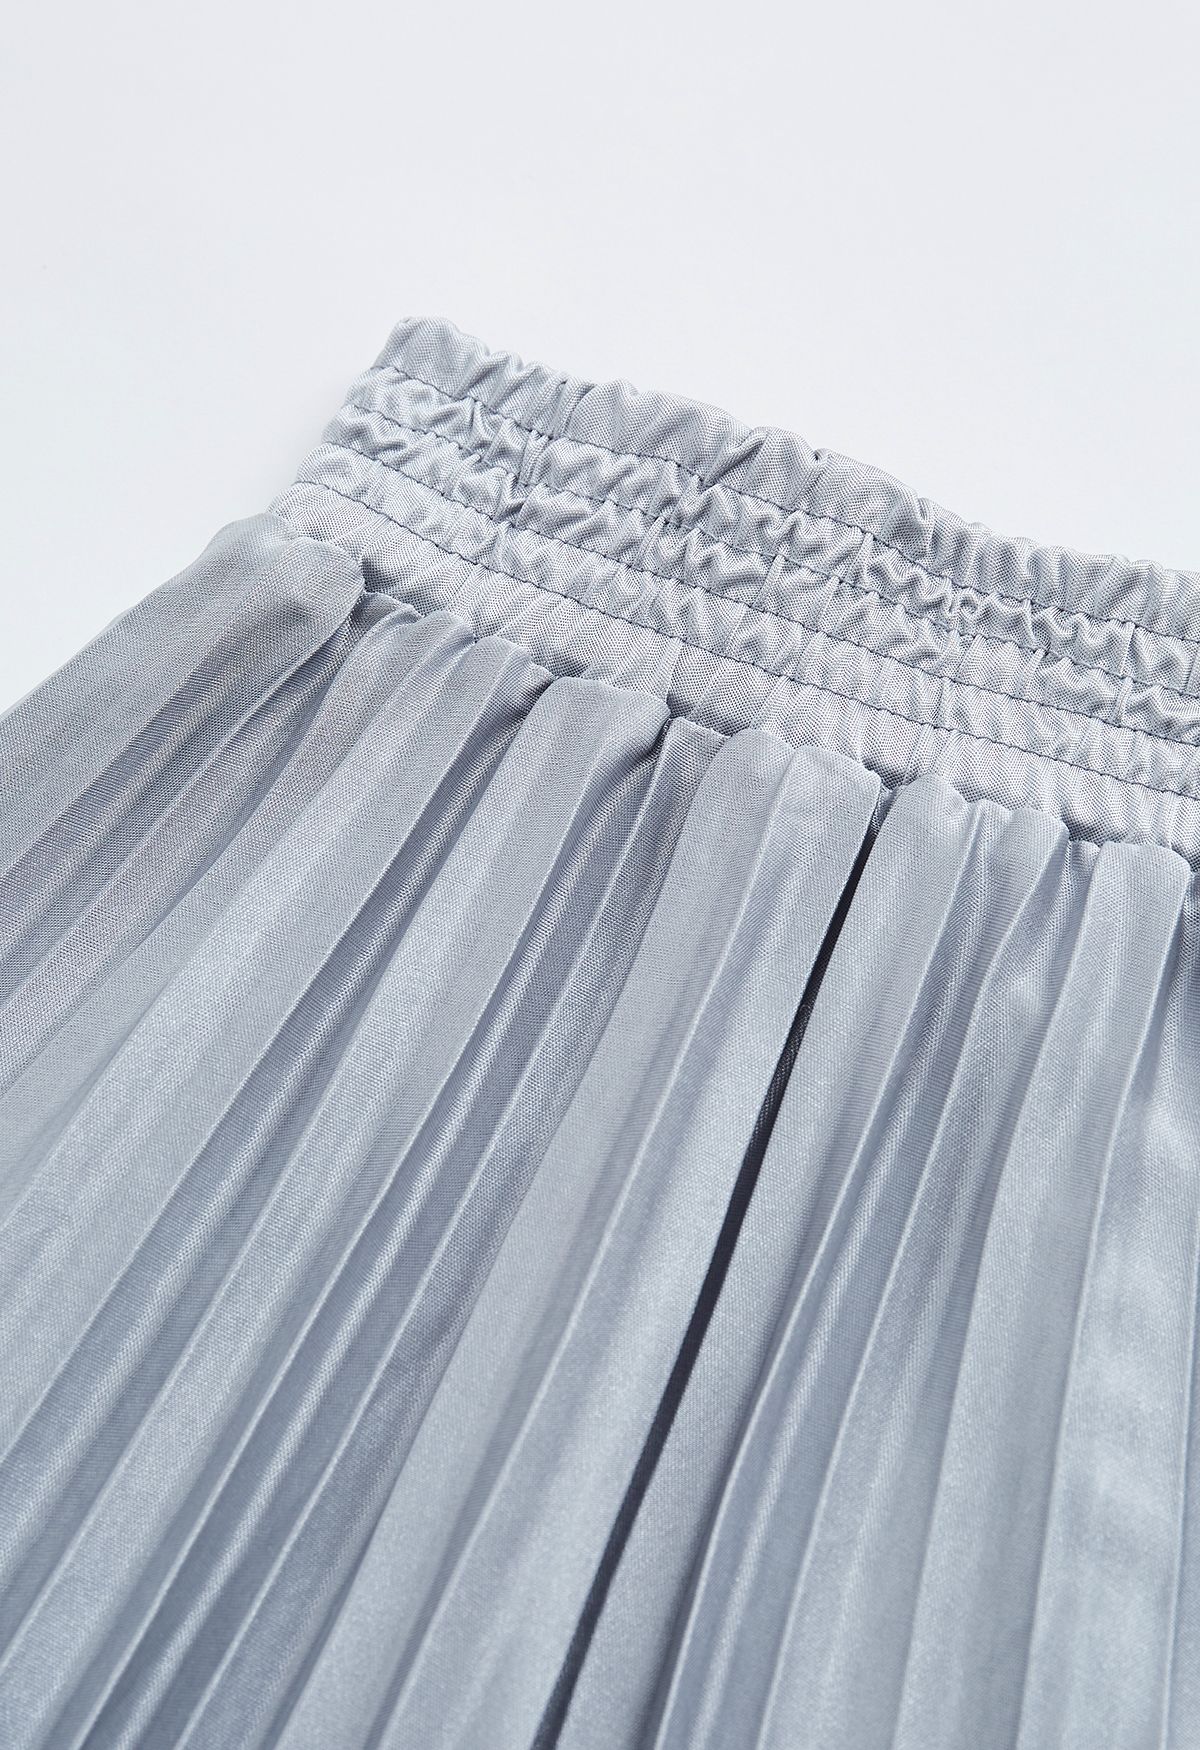 Glossy Pleated Maxi Skirt in Grey